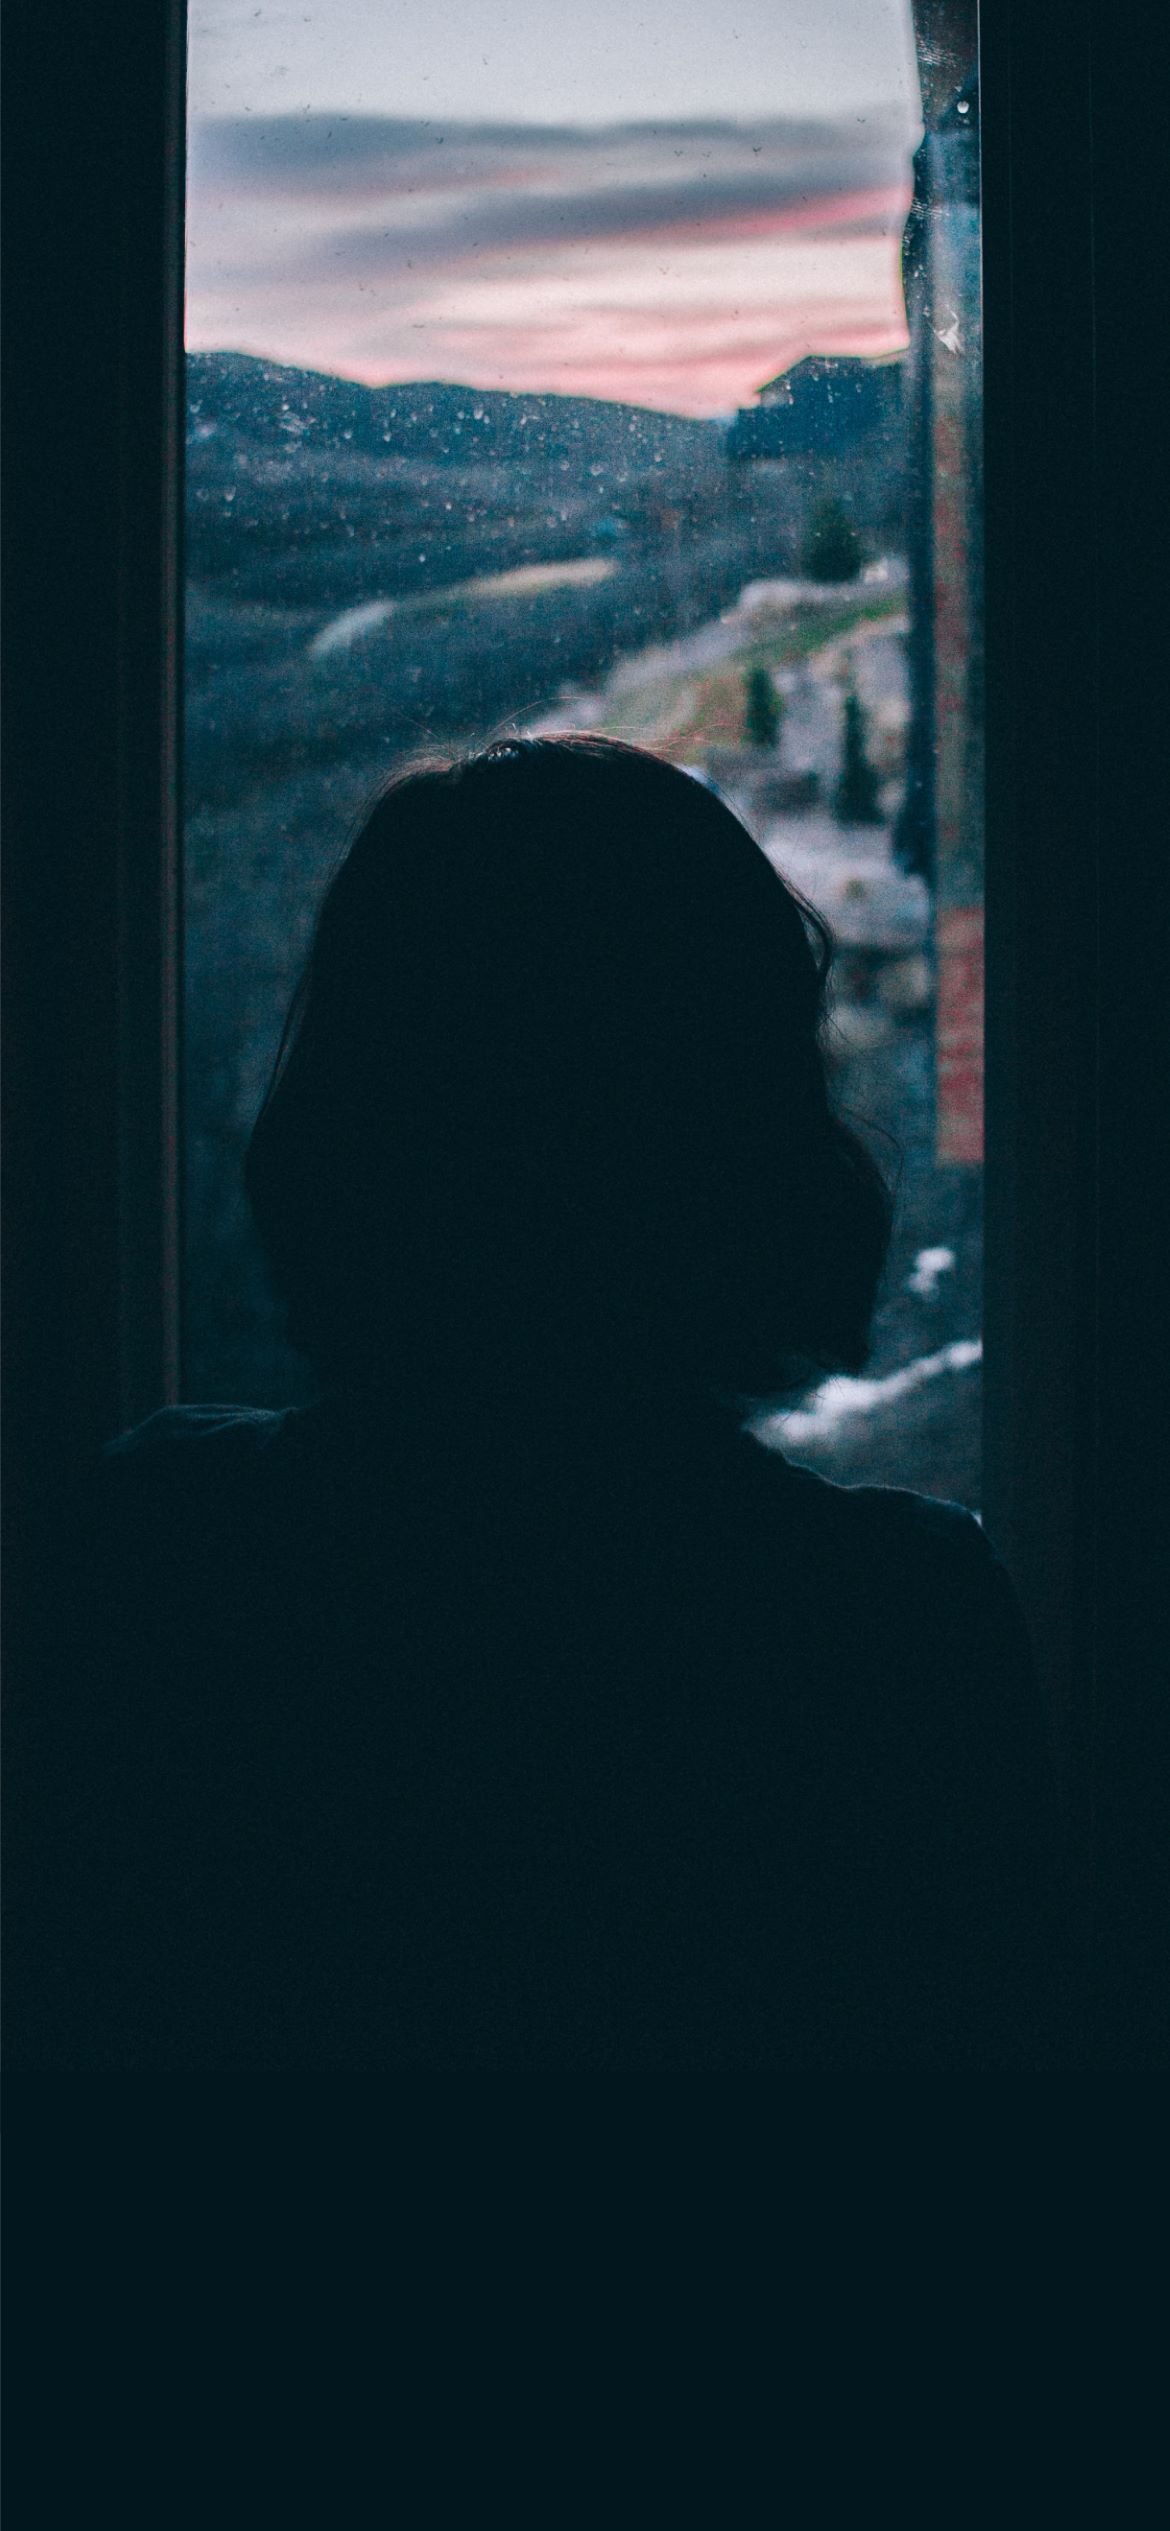 A woman's silhouette is seen in front of a window - Sad, depressing, sad quotes, depression